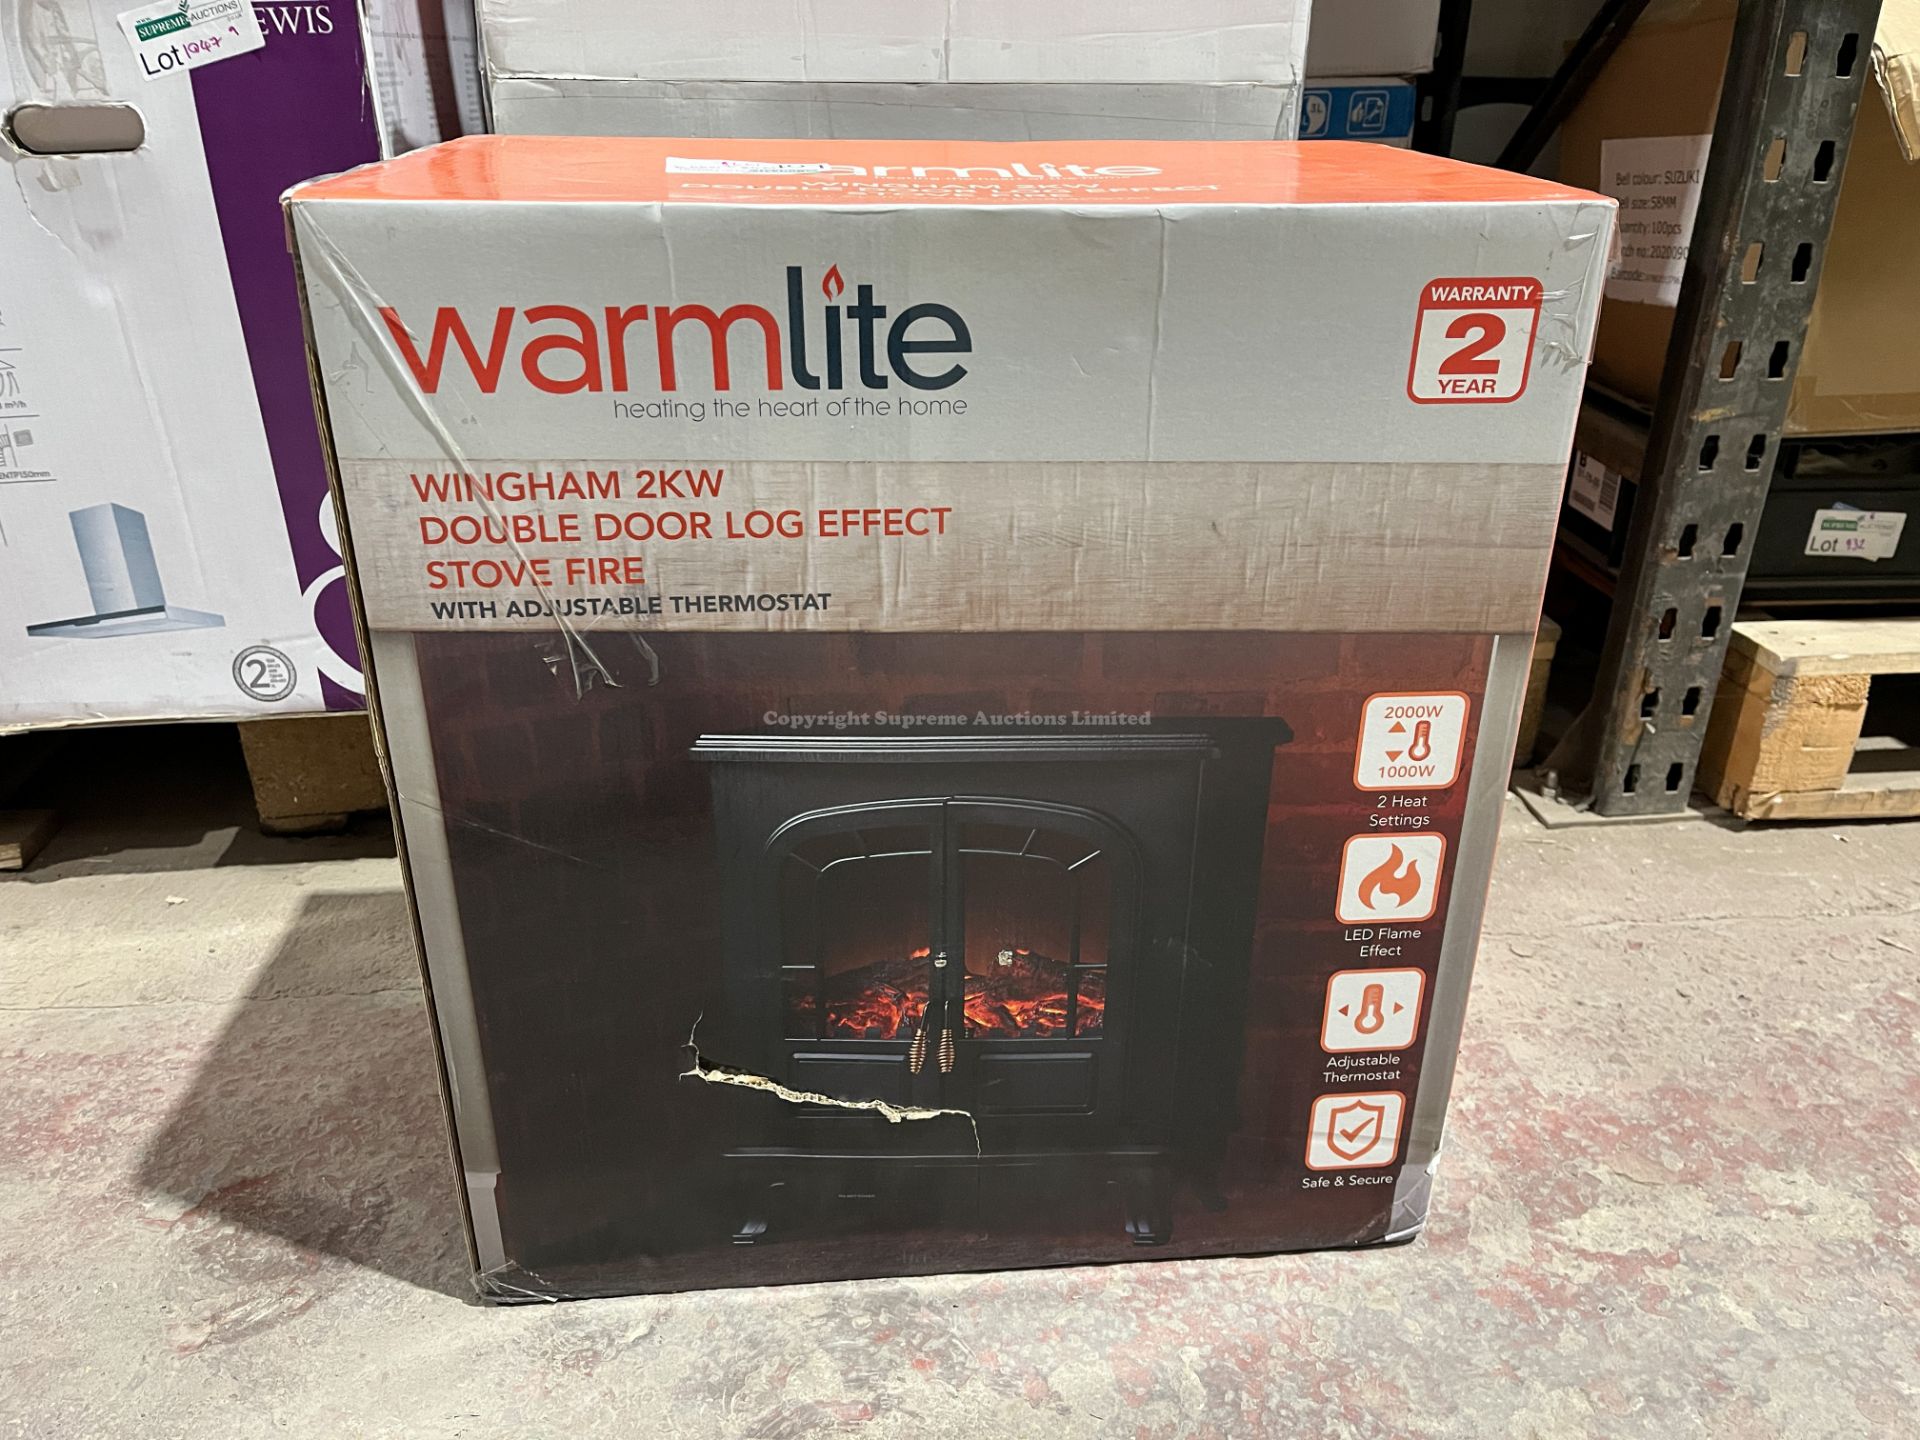 BRAND NEW WARMLITE 2KW DOUBLE DOOR LOG EFFECT STOVE FIRE WITH ADJUSTABLE THERMOSTAT R6-4